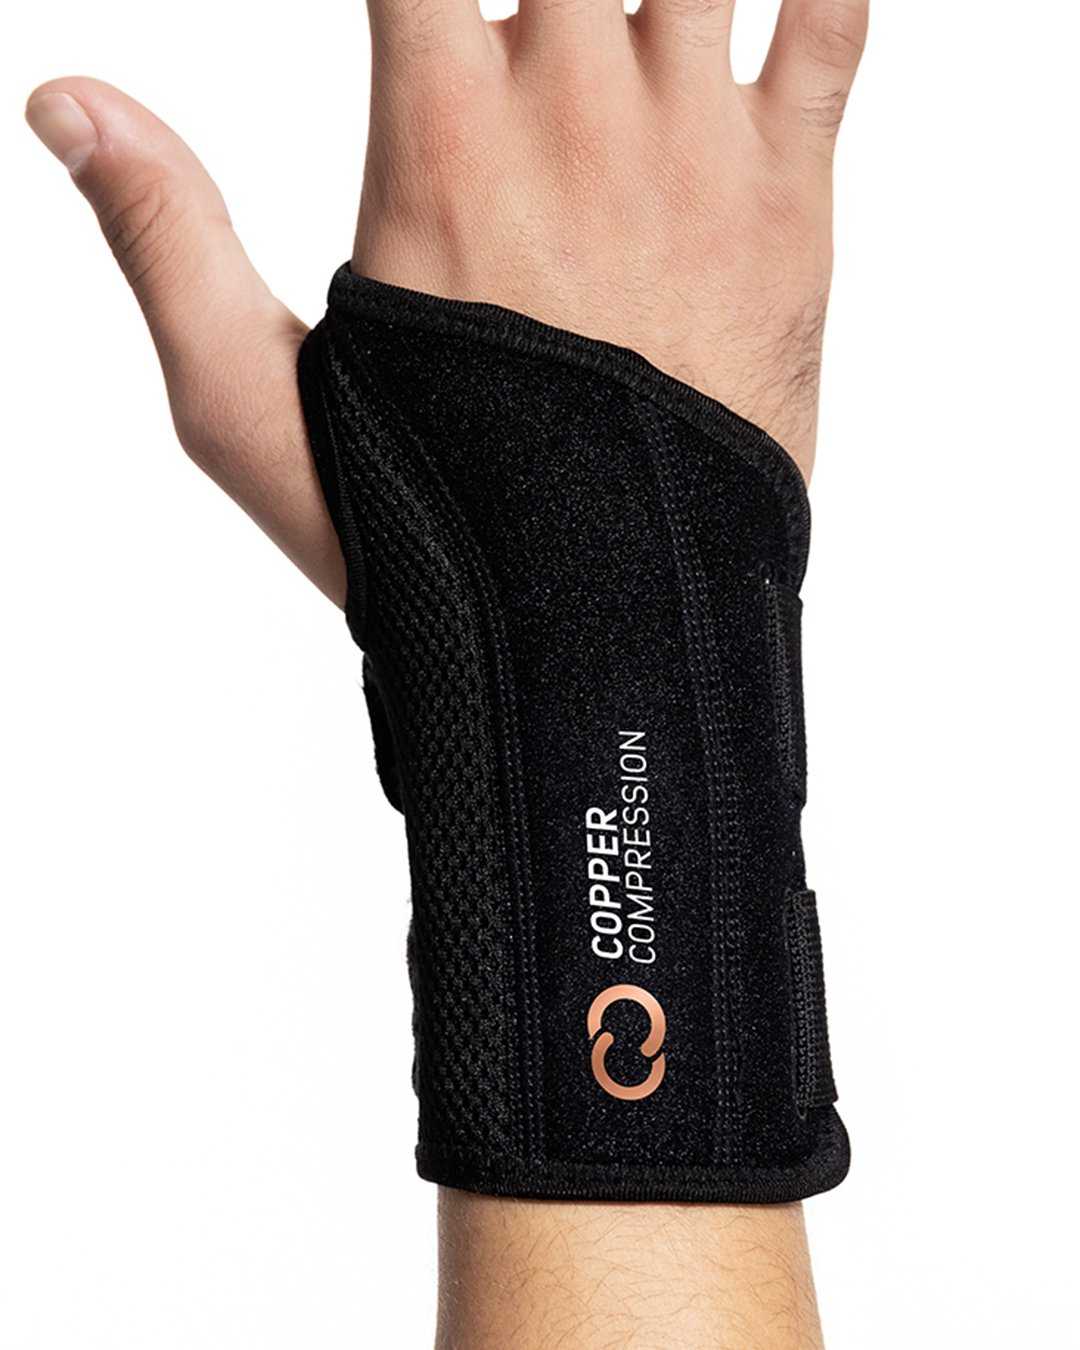 Copper Compression Wrist Brace - Copper Infused Adjustable Orthopedic  Support Splint for Pain, Ganglion Cyst, Carpal Tunnel, Arthritis,  Tendinitis, RSI, Tendinopathy for Men Women Fits Right Hand : :  Health & Personal